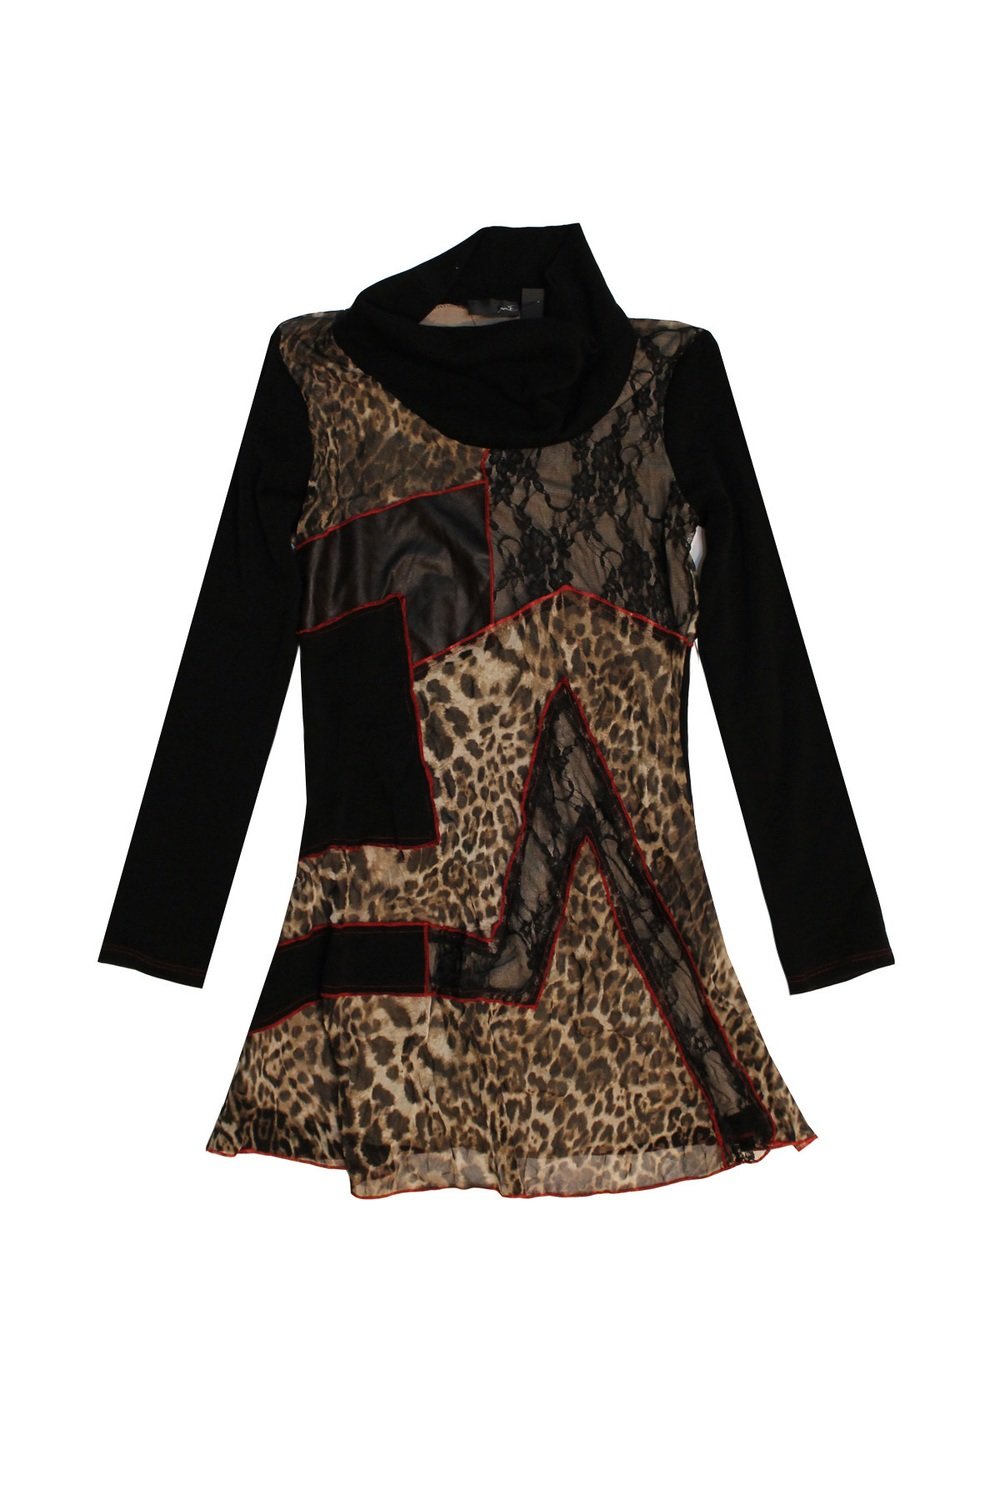 ME Paris: Red Leopard & Lace Sweater Tunic SOLD OUT